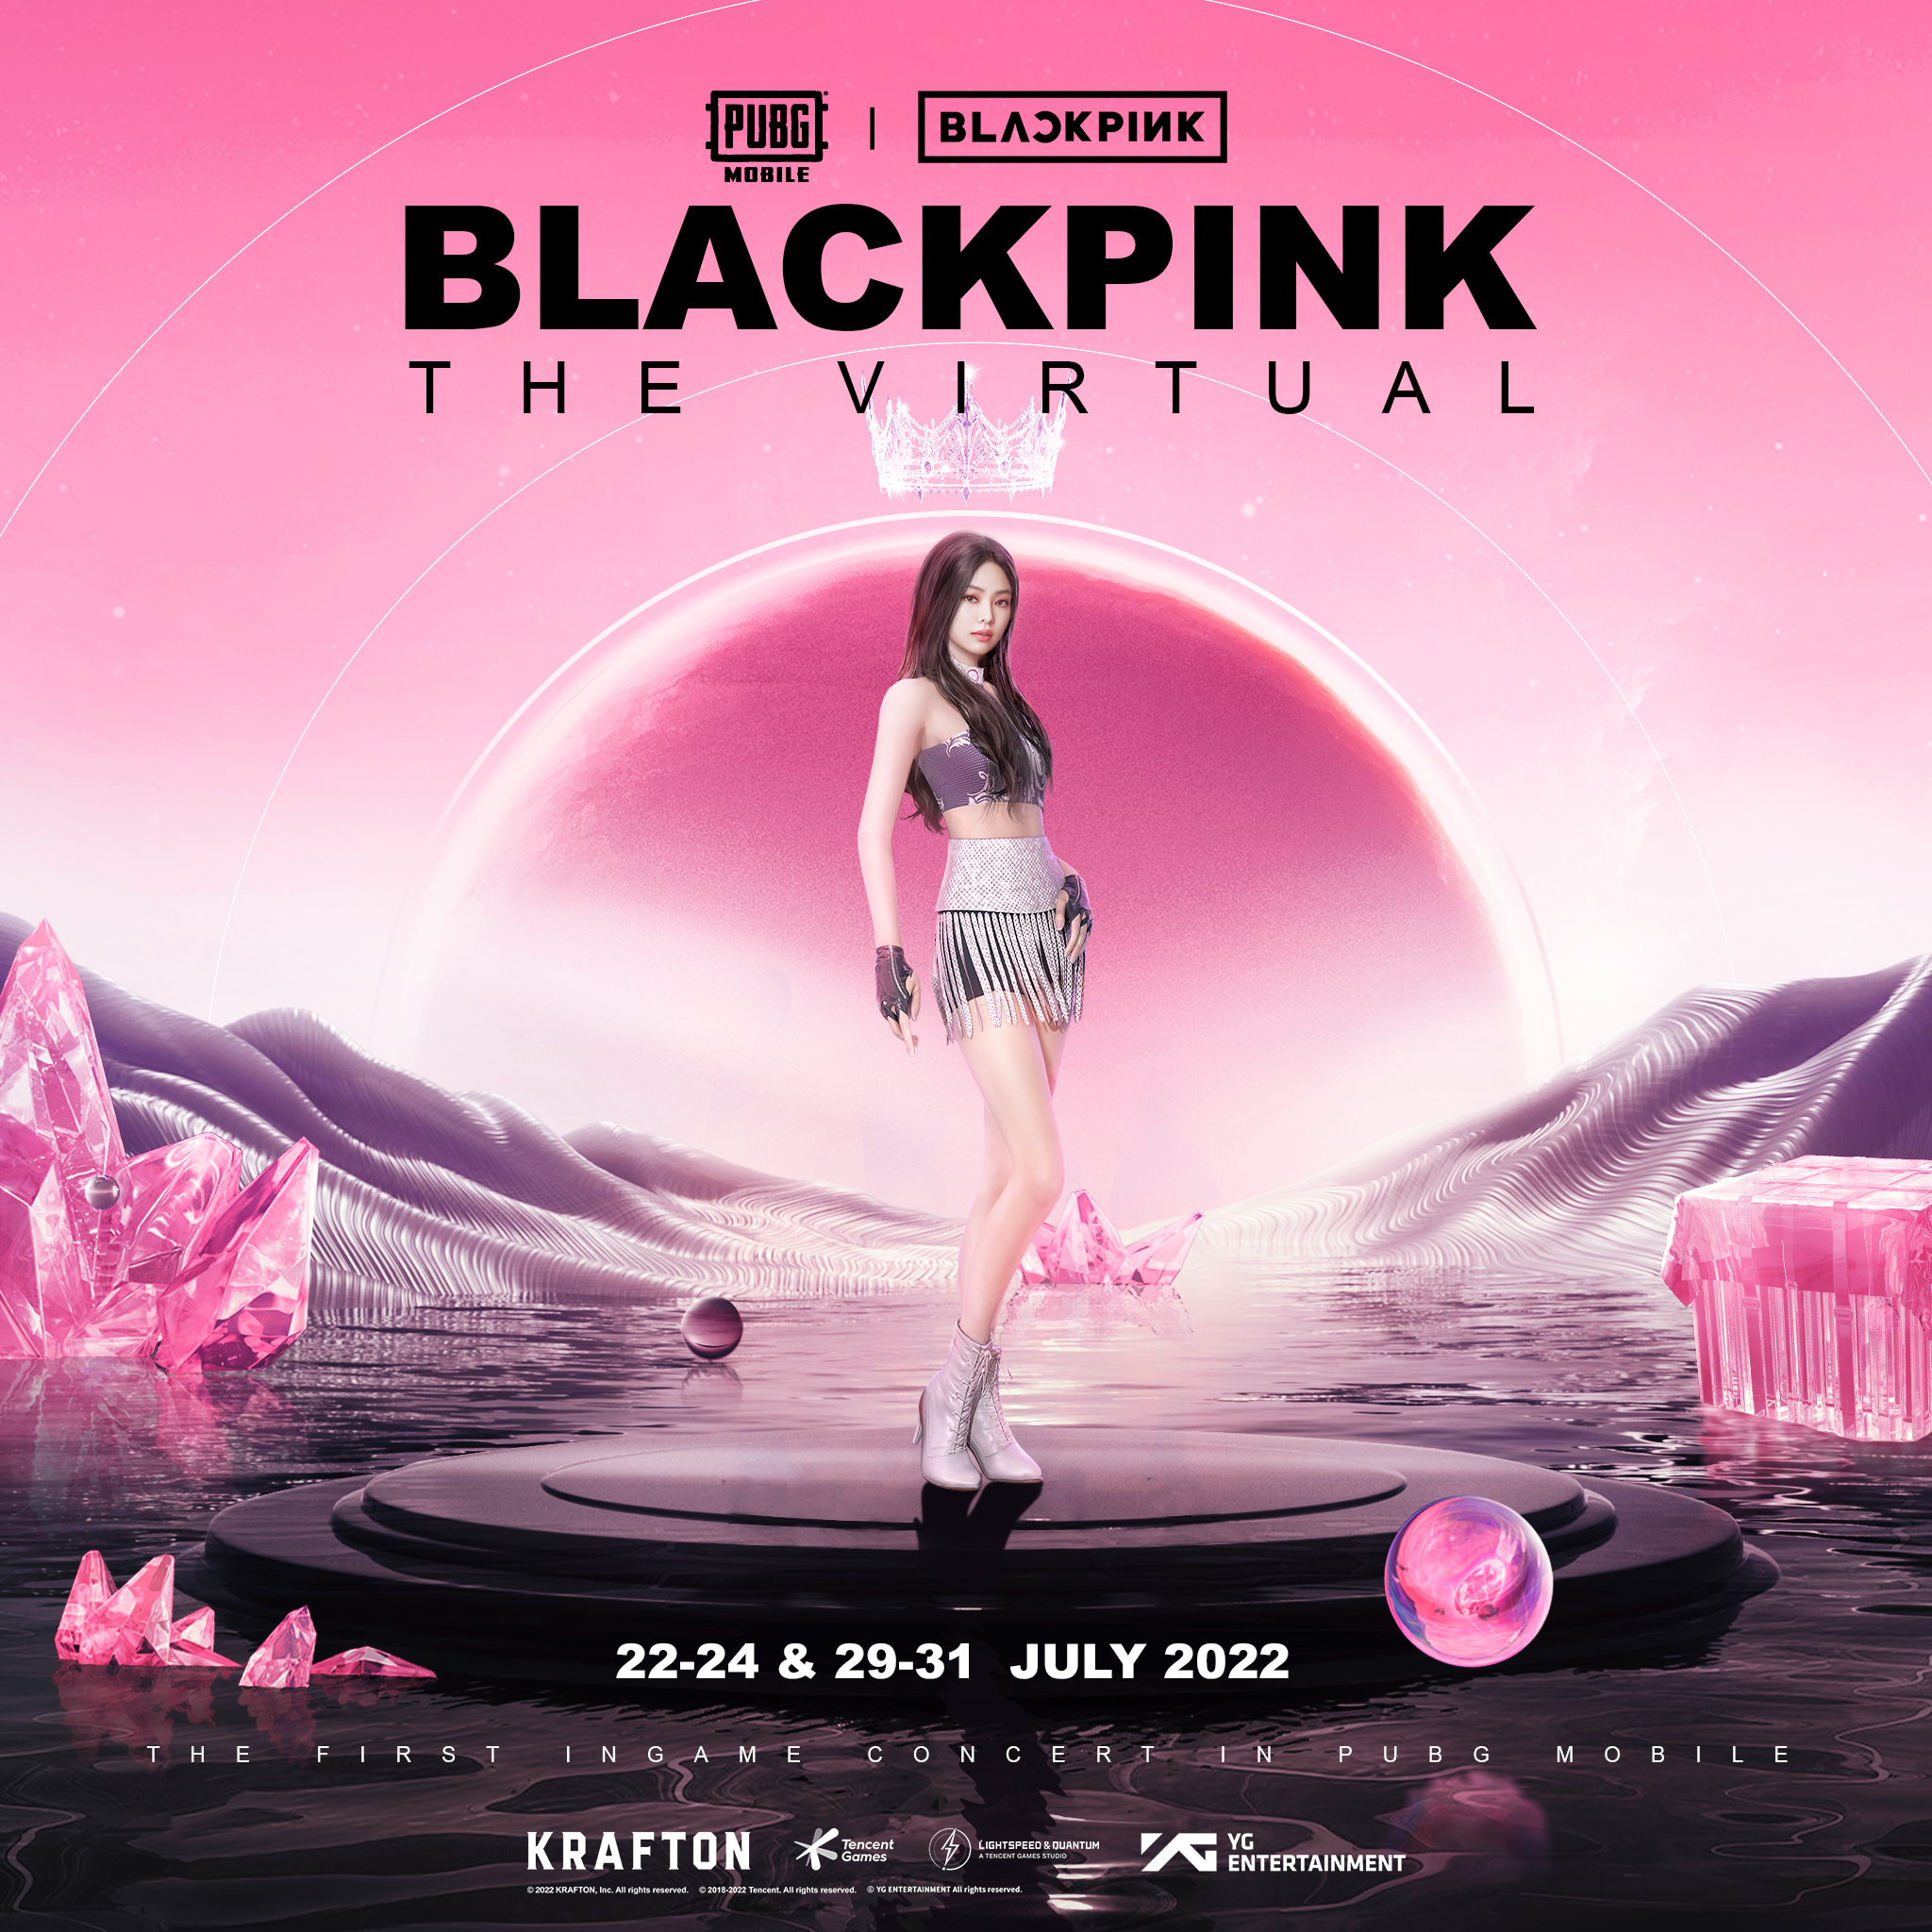 BLACKPINK MOBILE 2022 In Game Concert: THE VIRTUAL (Individual + Group Teaser Posters)